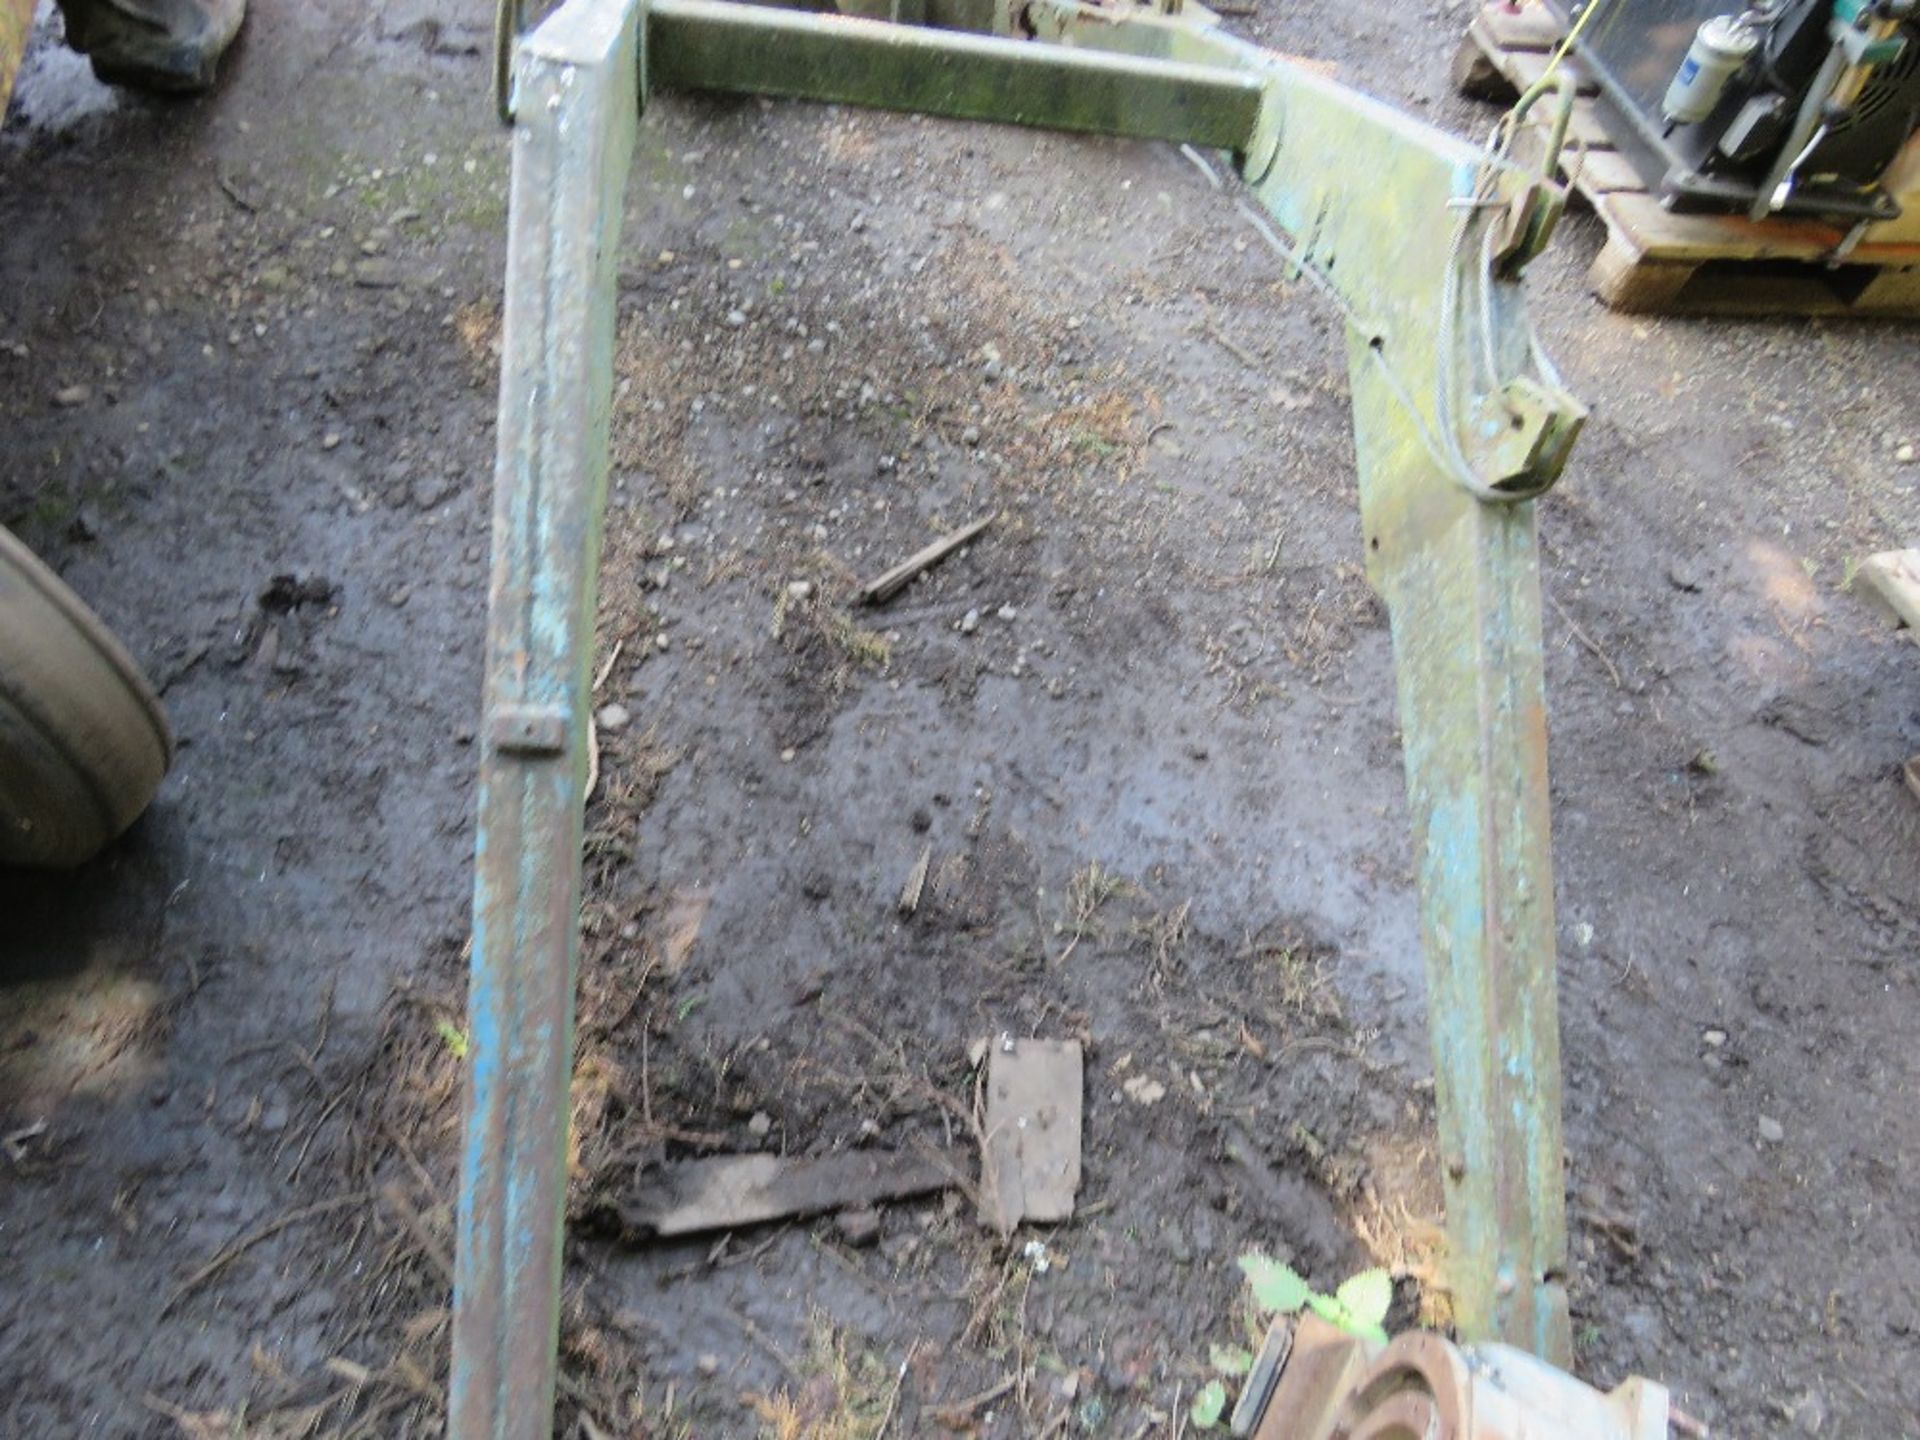 FORDSON DEXTA TRACTOR WITH LOADER FRAME AND BRACKETS. UNUSED CONDITION UNKNOWN. MAY BE INCOMPLETE (I - Image 5 of 16